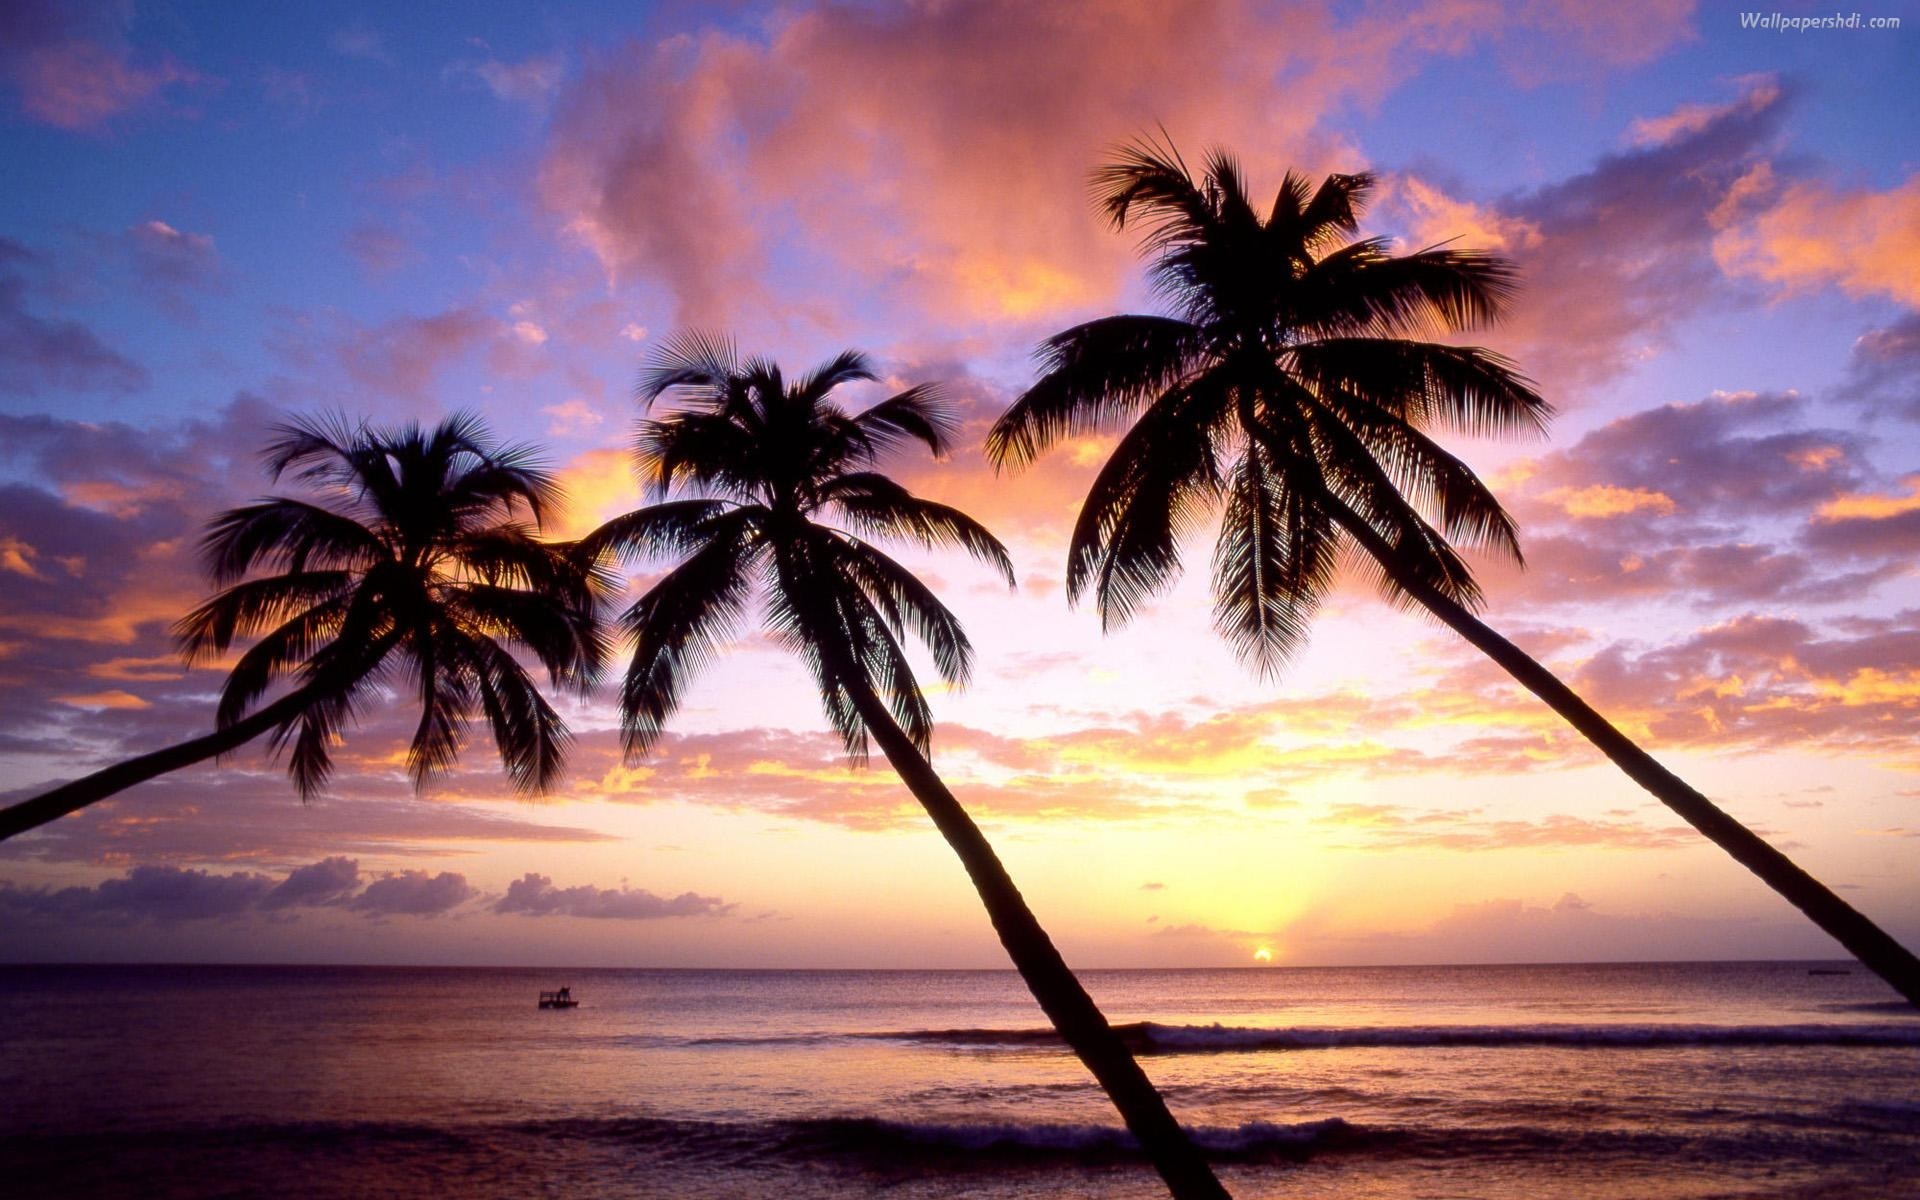 1920x1200 palm trees sunset images palm trees sunset pictures palm trees